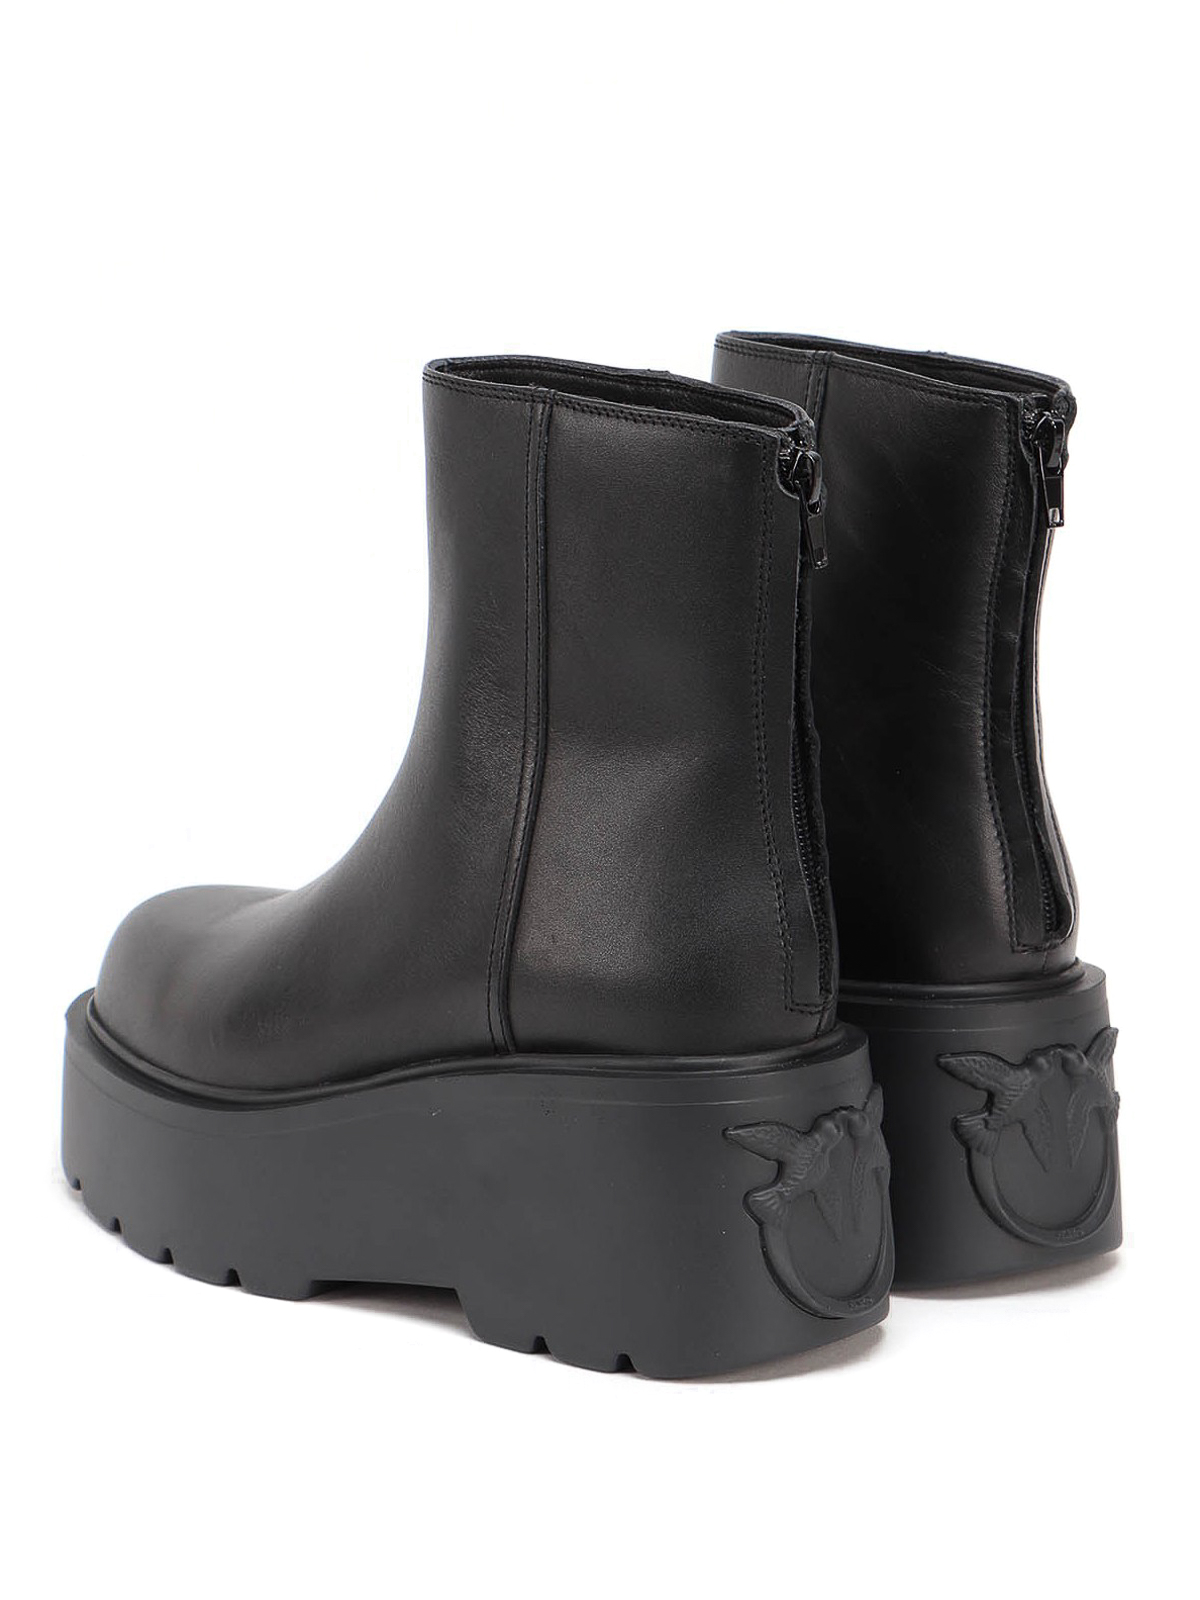 Ankle boots Pinko - Bahia ankle boots - 1H20Y5Y7KBZ99 | iKRIX.com